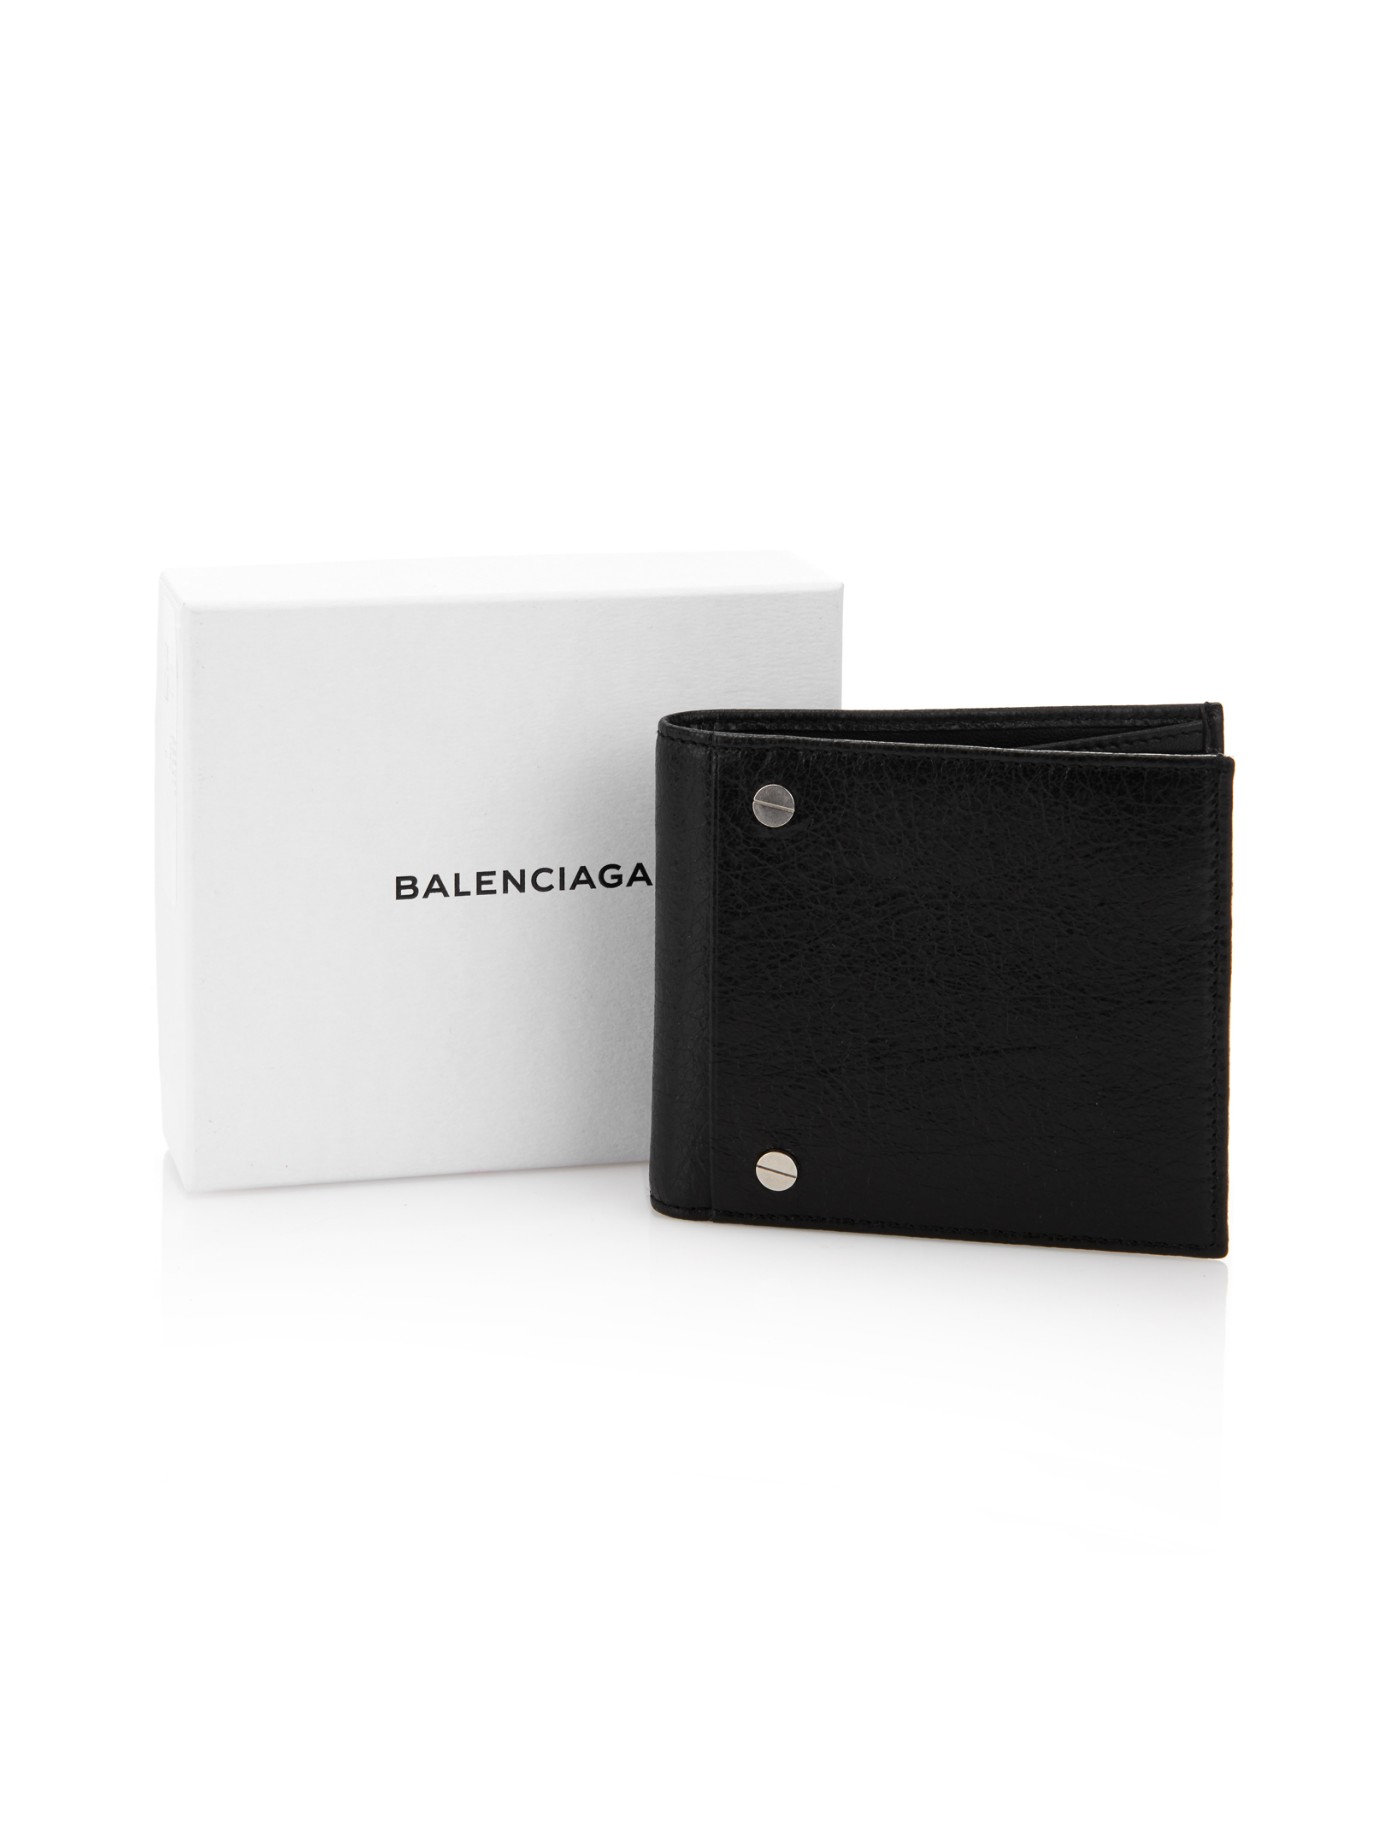 Lyst - Balenciaga Arena Leather Wallet in Black for Men